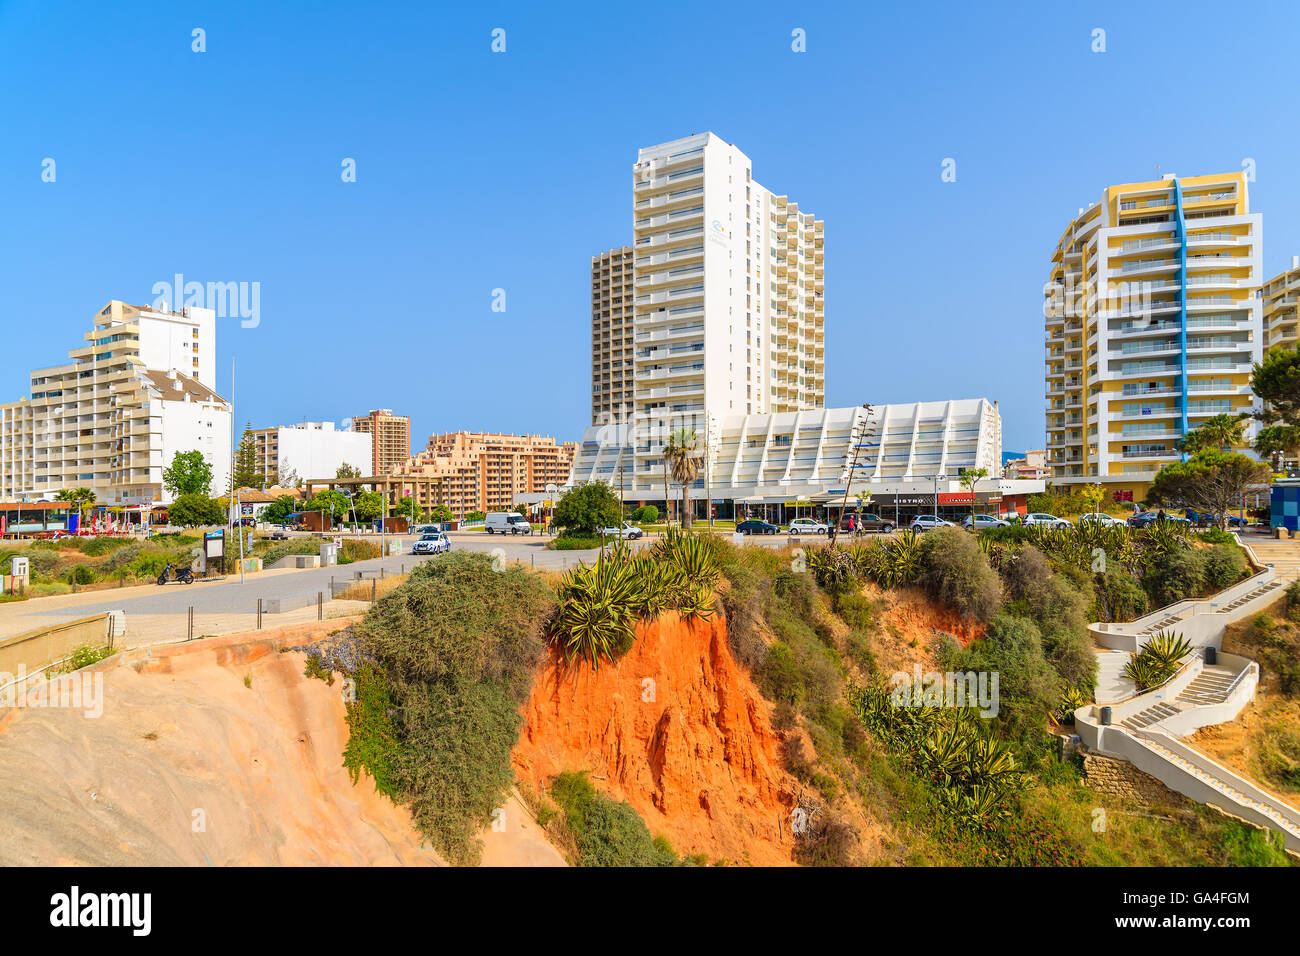 PORTIMAO TOWN, PORTUGAL - MAY 14, 2015: high rise apartment buildings in Portimao town on coast of Protugal. More and more investors from western Europe buy holiday apartments in Algarve region. Stock Photo